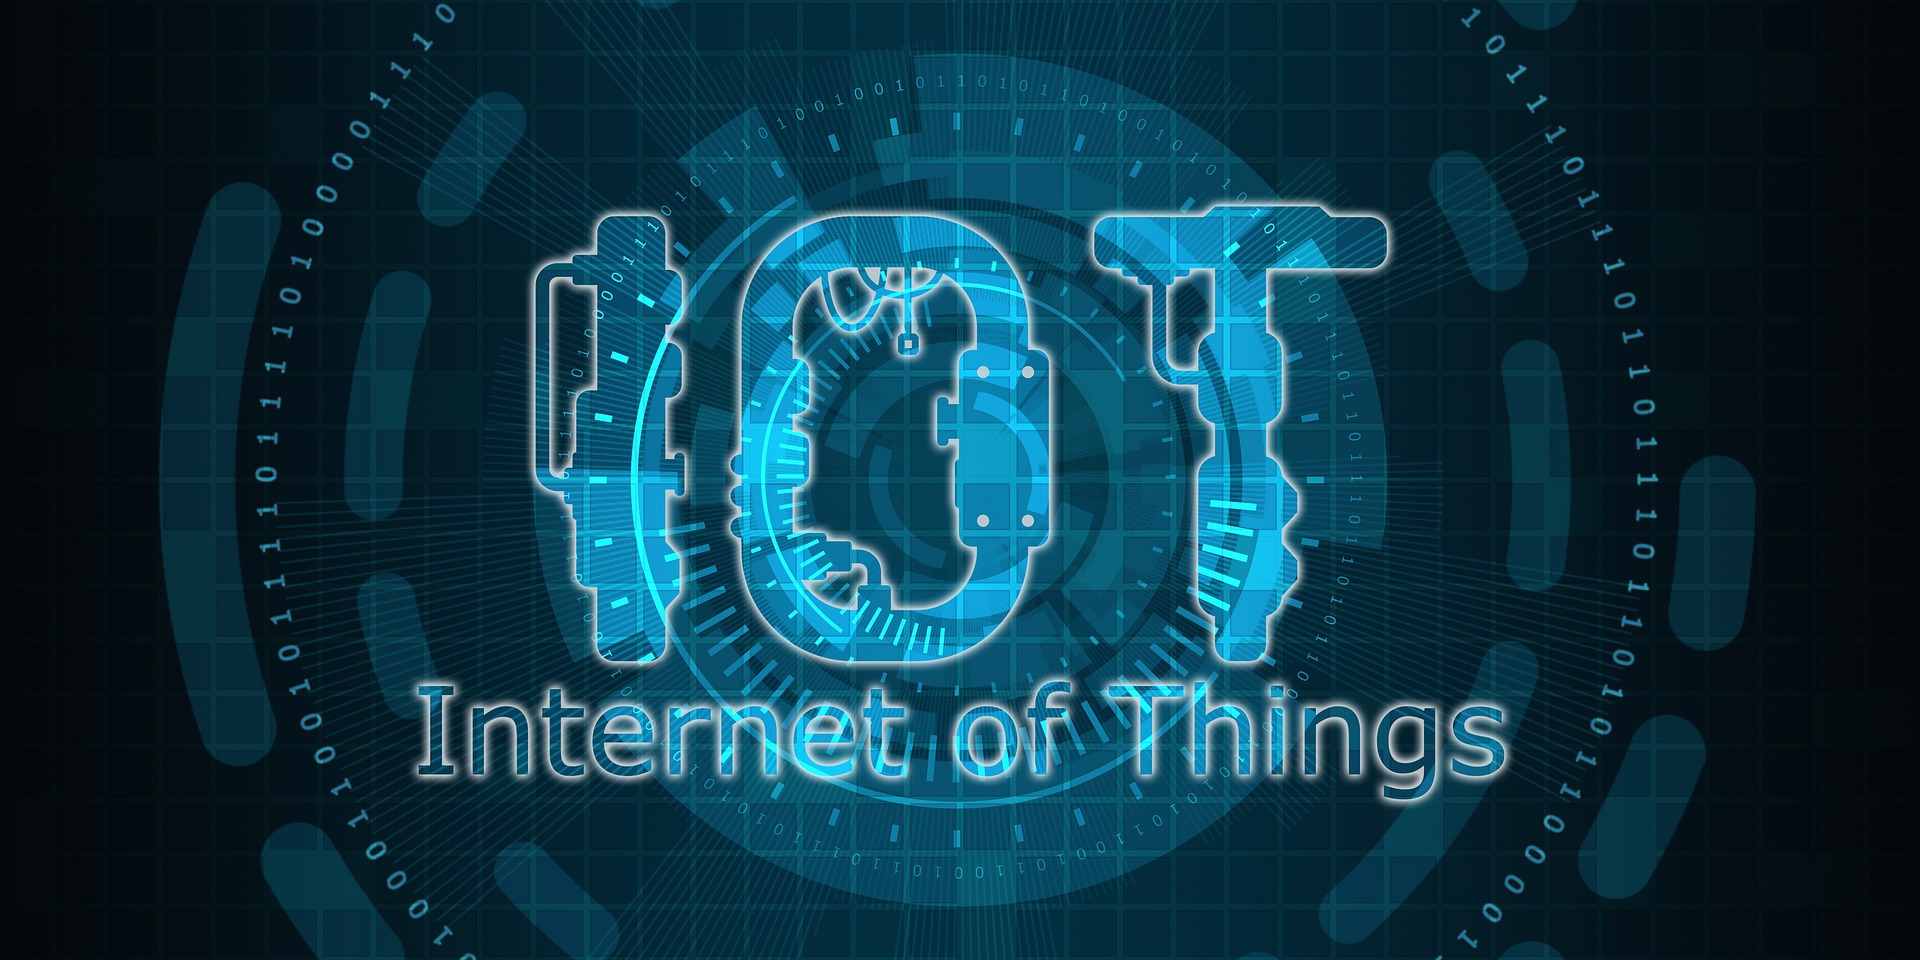 The Internet of Things (IoT) in retail